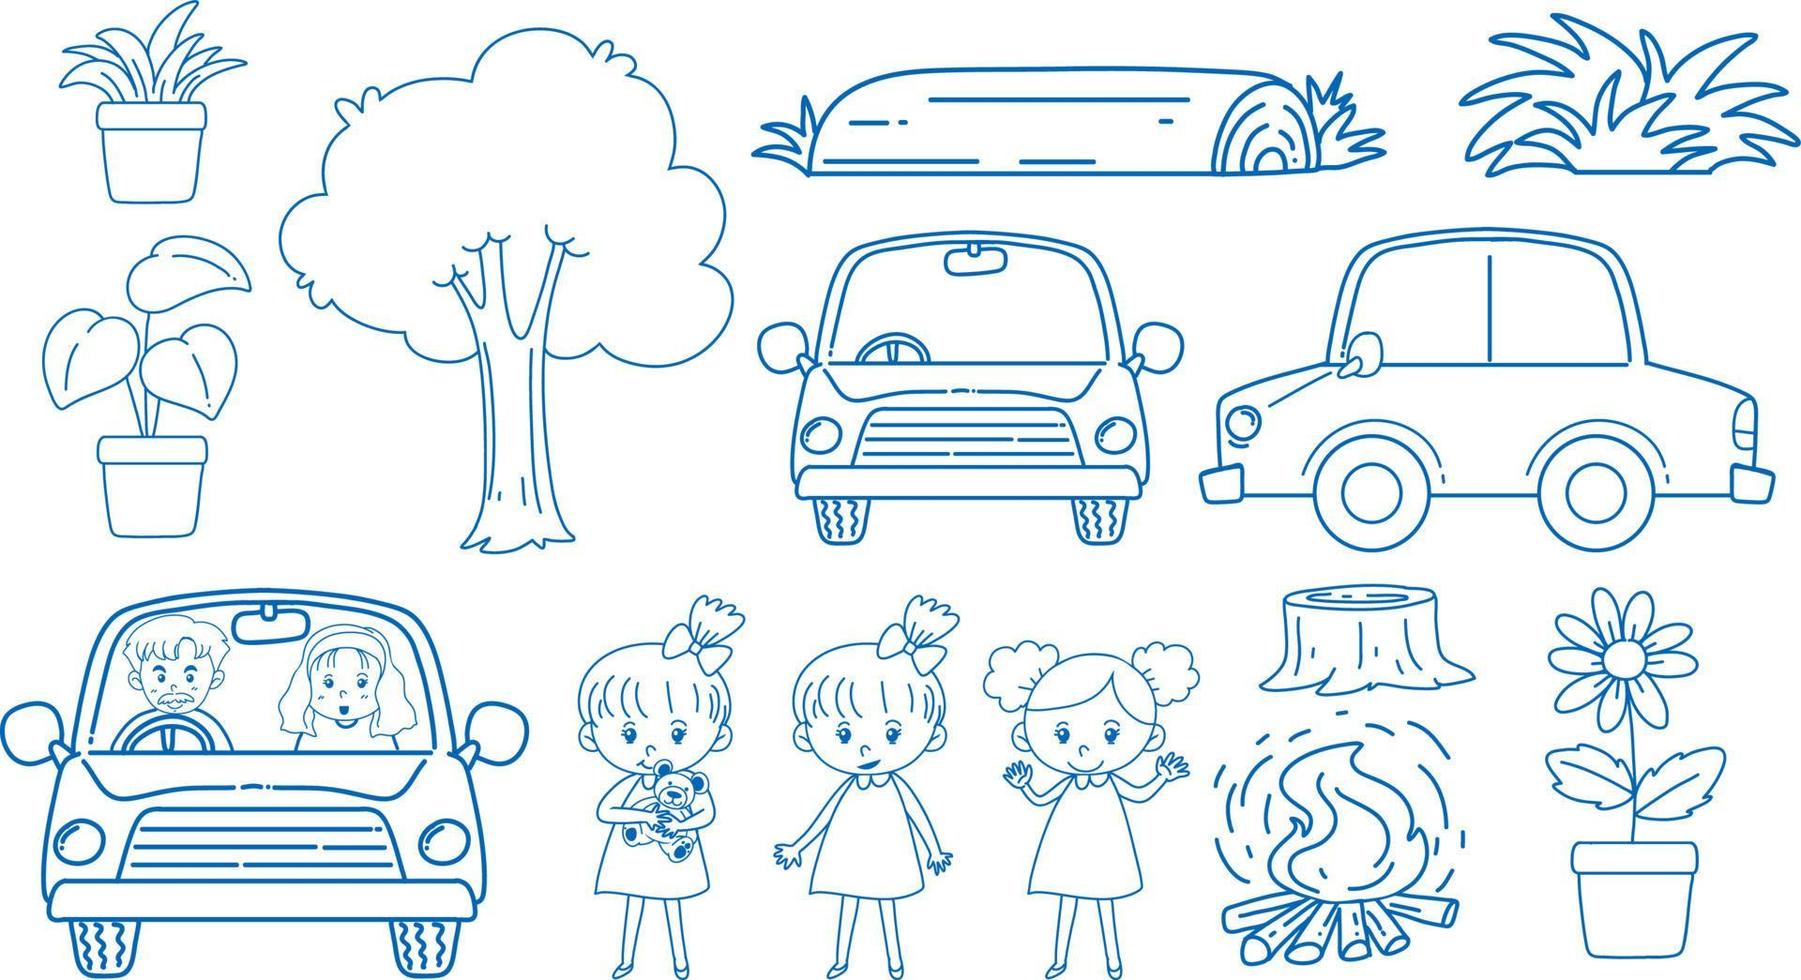 Drafting cartoon for kids and cars vector